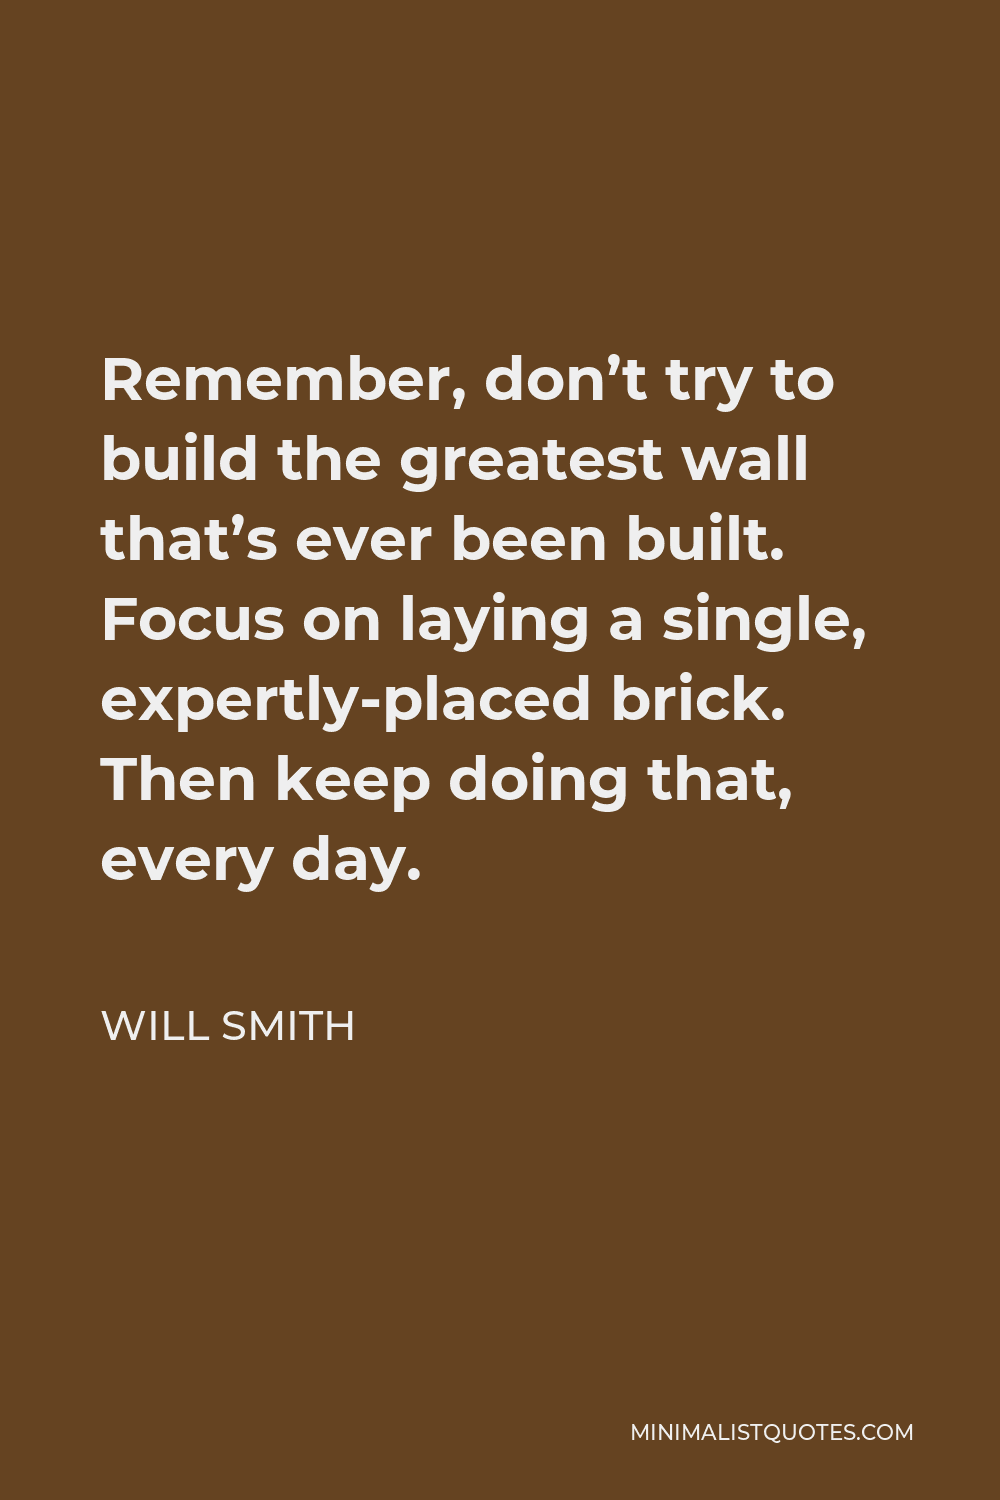 Will Smith Quote - Remember, don’t try to build the greatest wall that’s ever been built. Focus on laying a single, expertly-placed brick. Then keep doing that, every day.